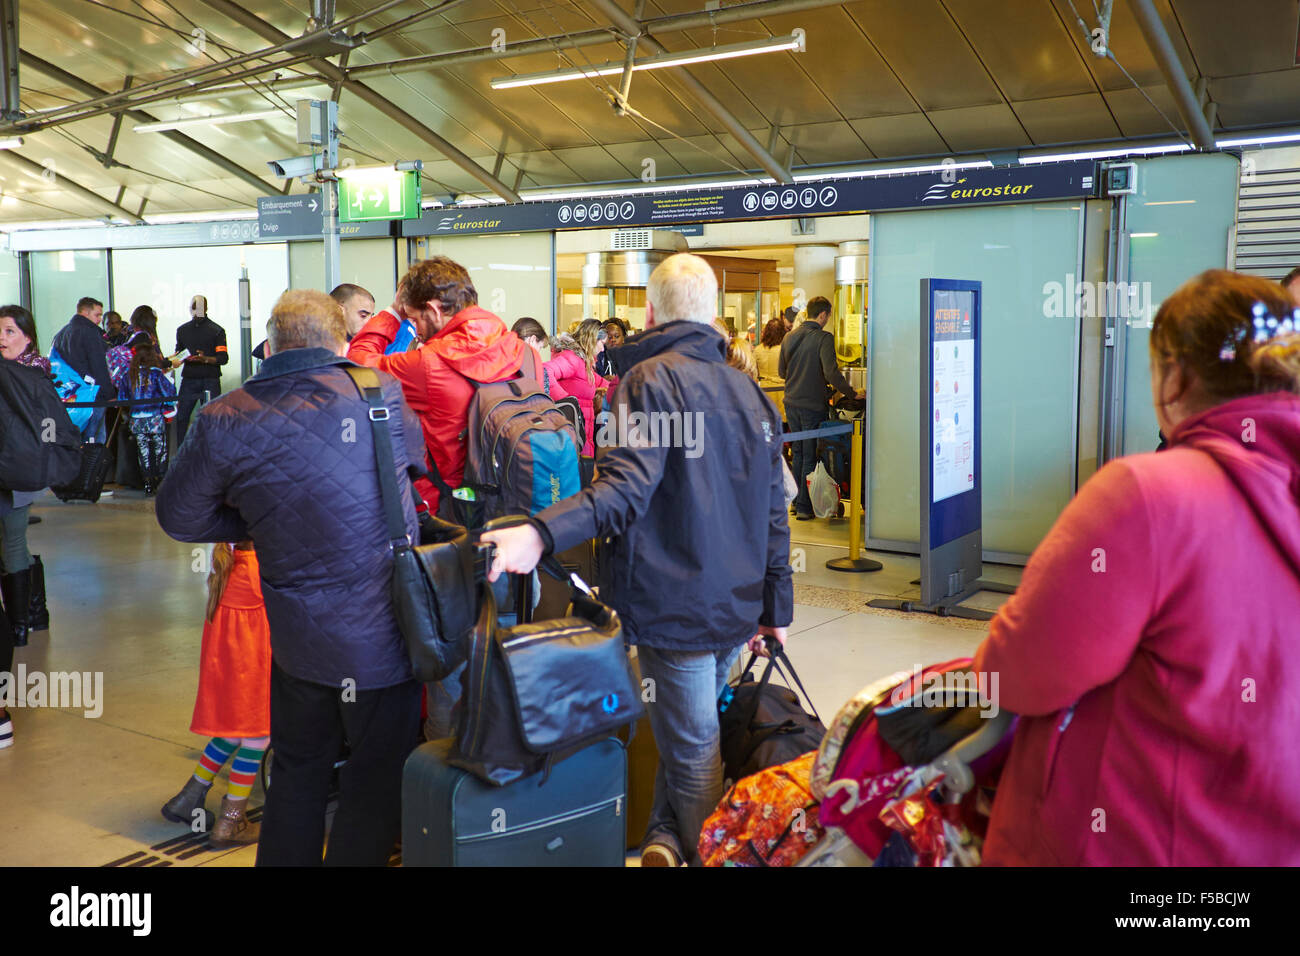 Queuing At The Euro Star Entrance Marne Train Station Disneyland Paris Marne-la-Vallee Chessy France Stock Photo